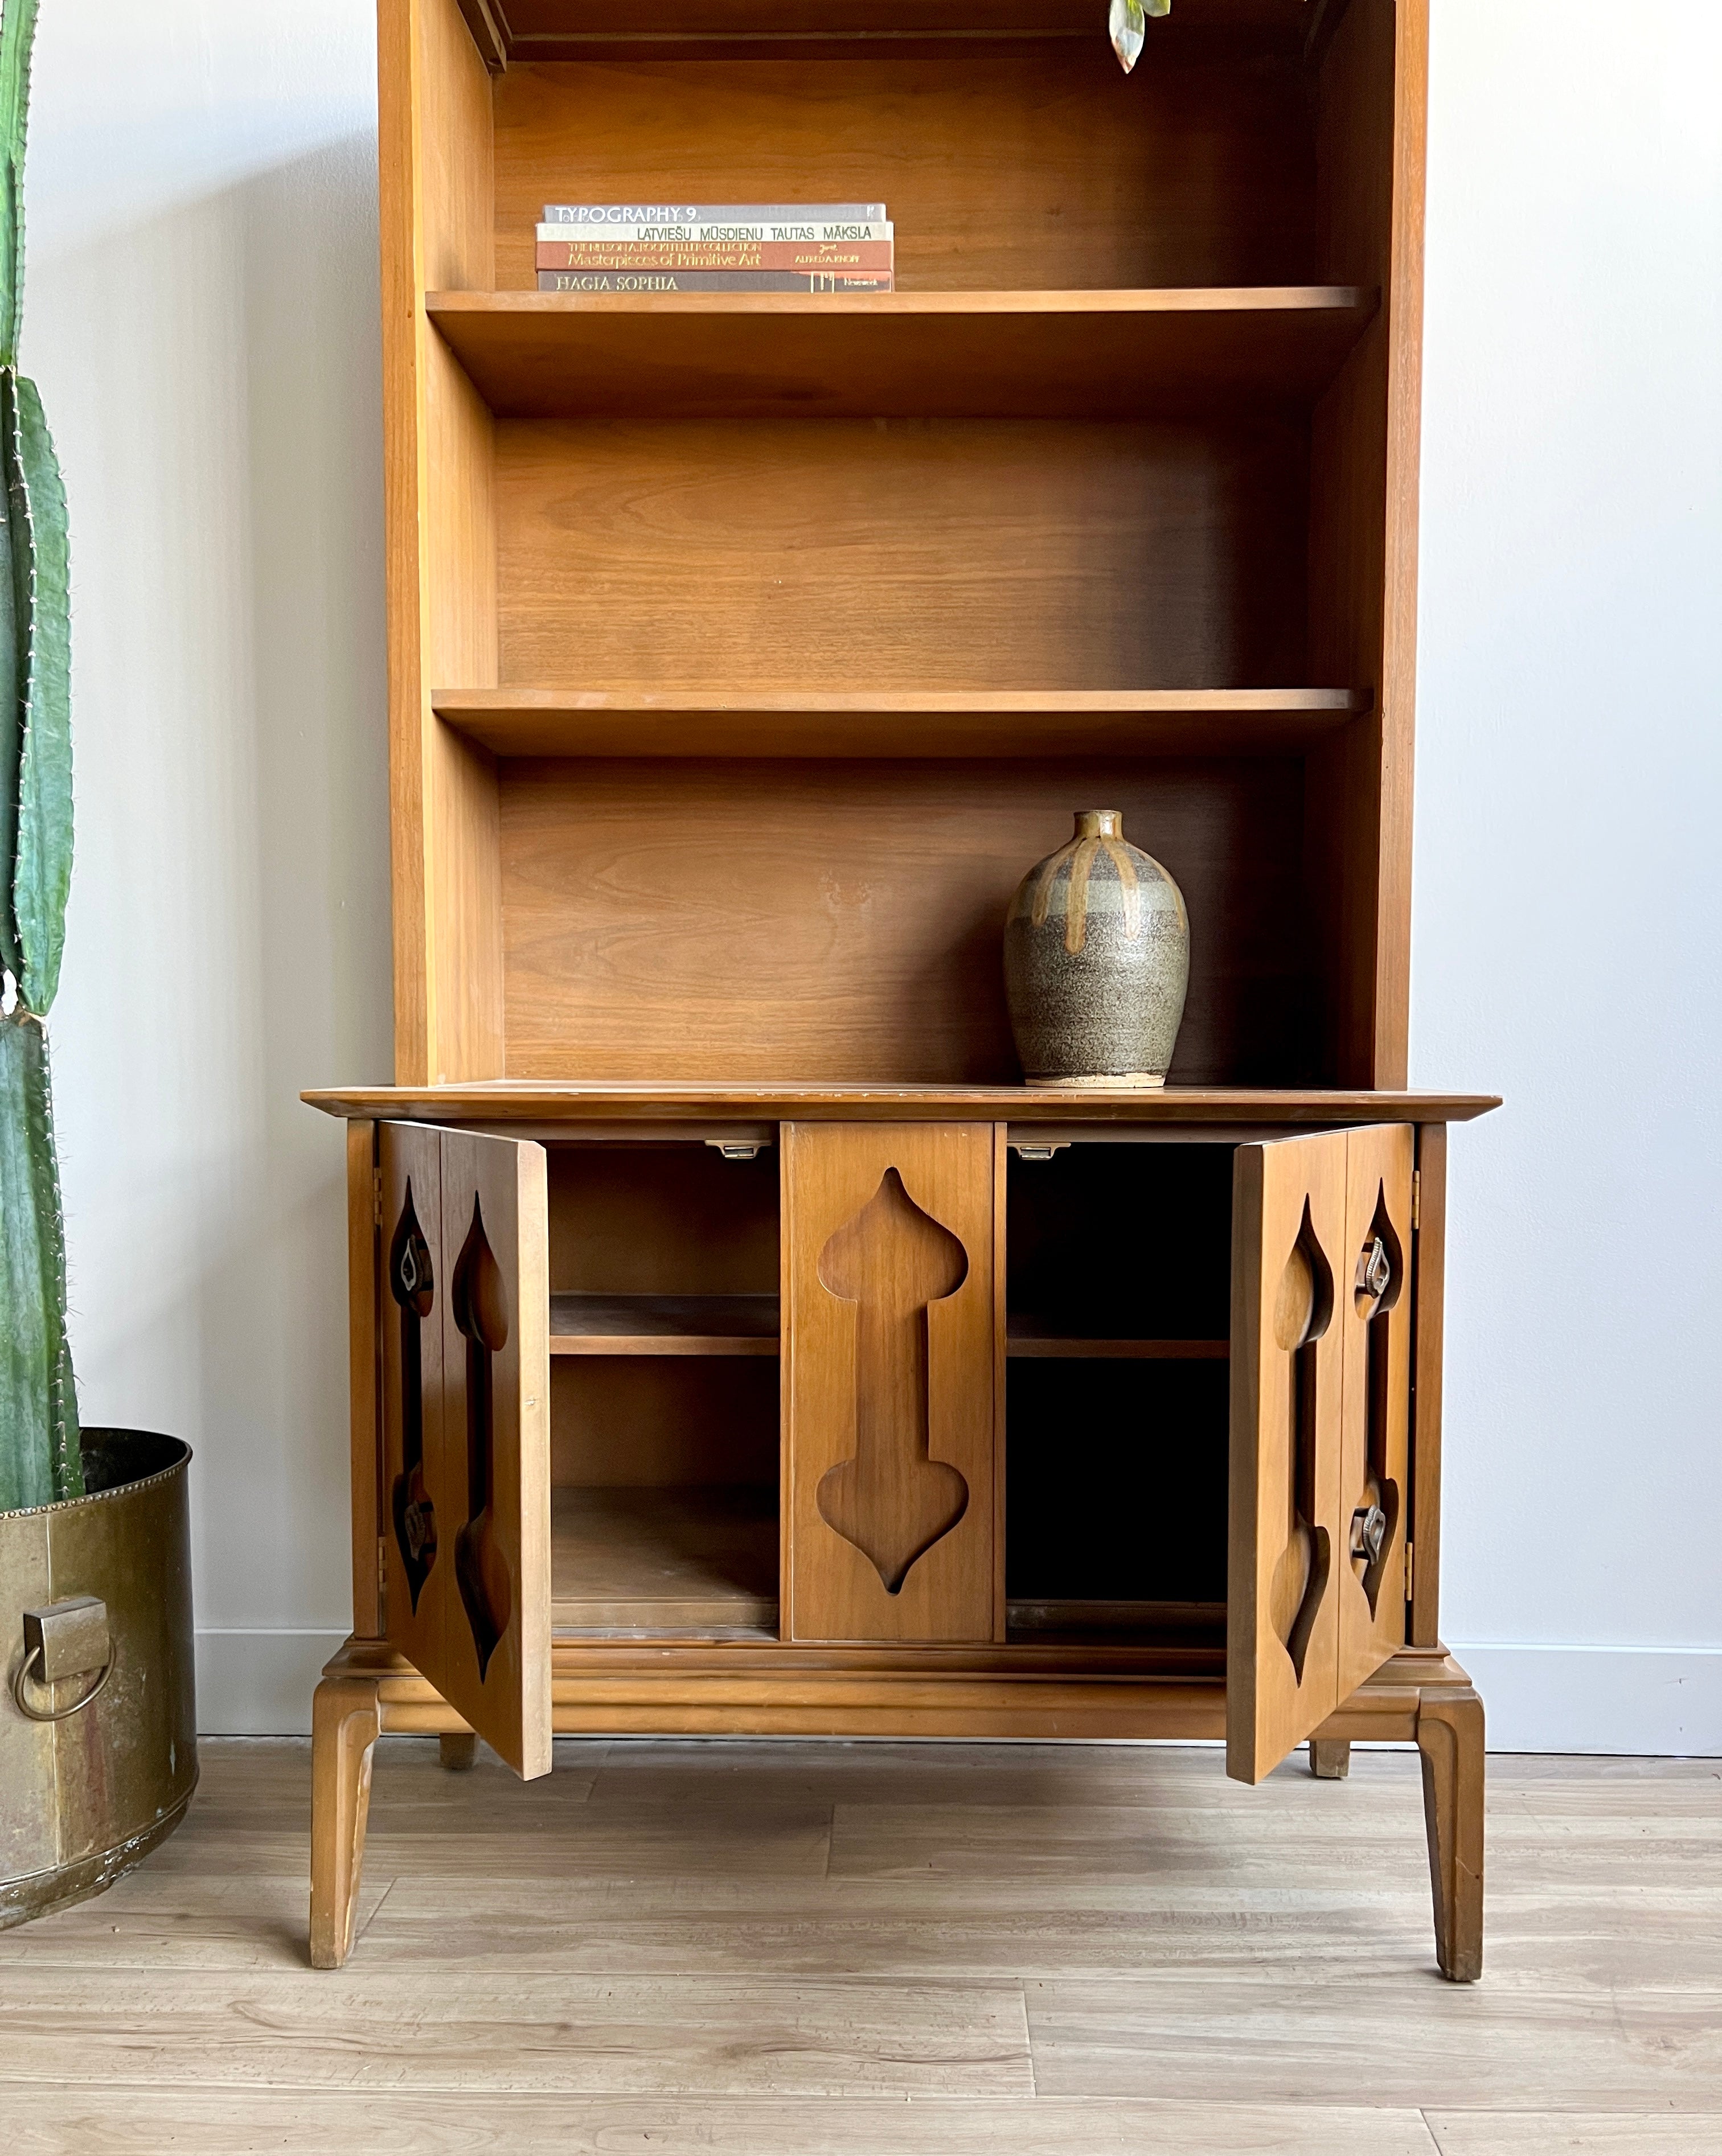 Vintage Mid Century Moroccan Style Shelving Unit